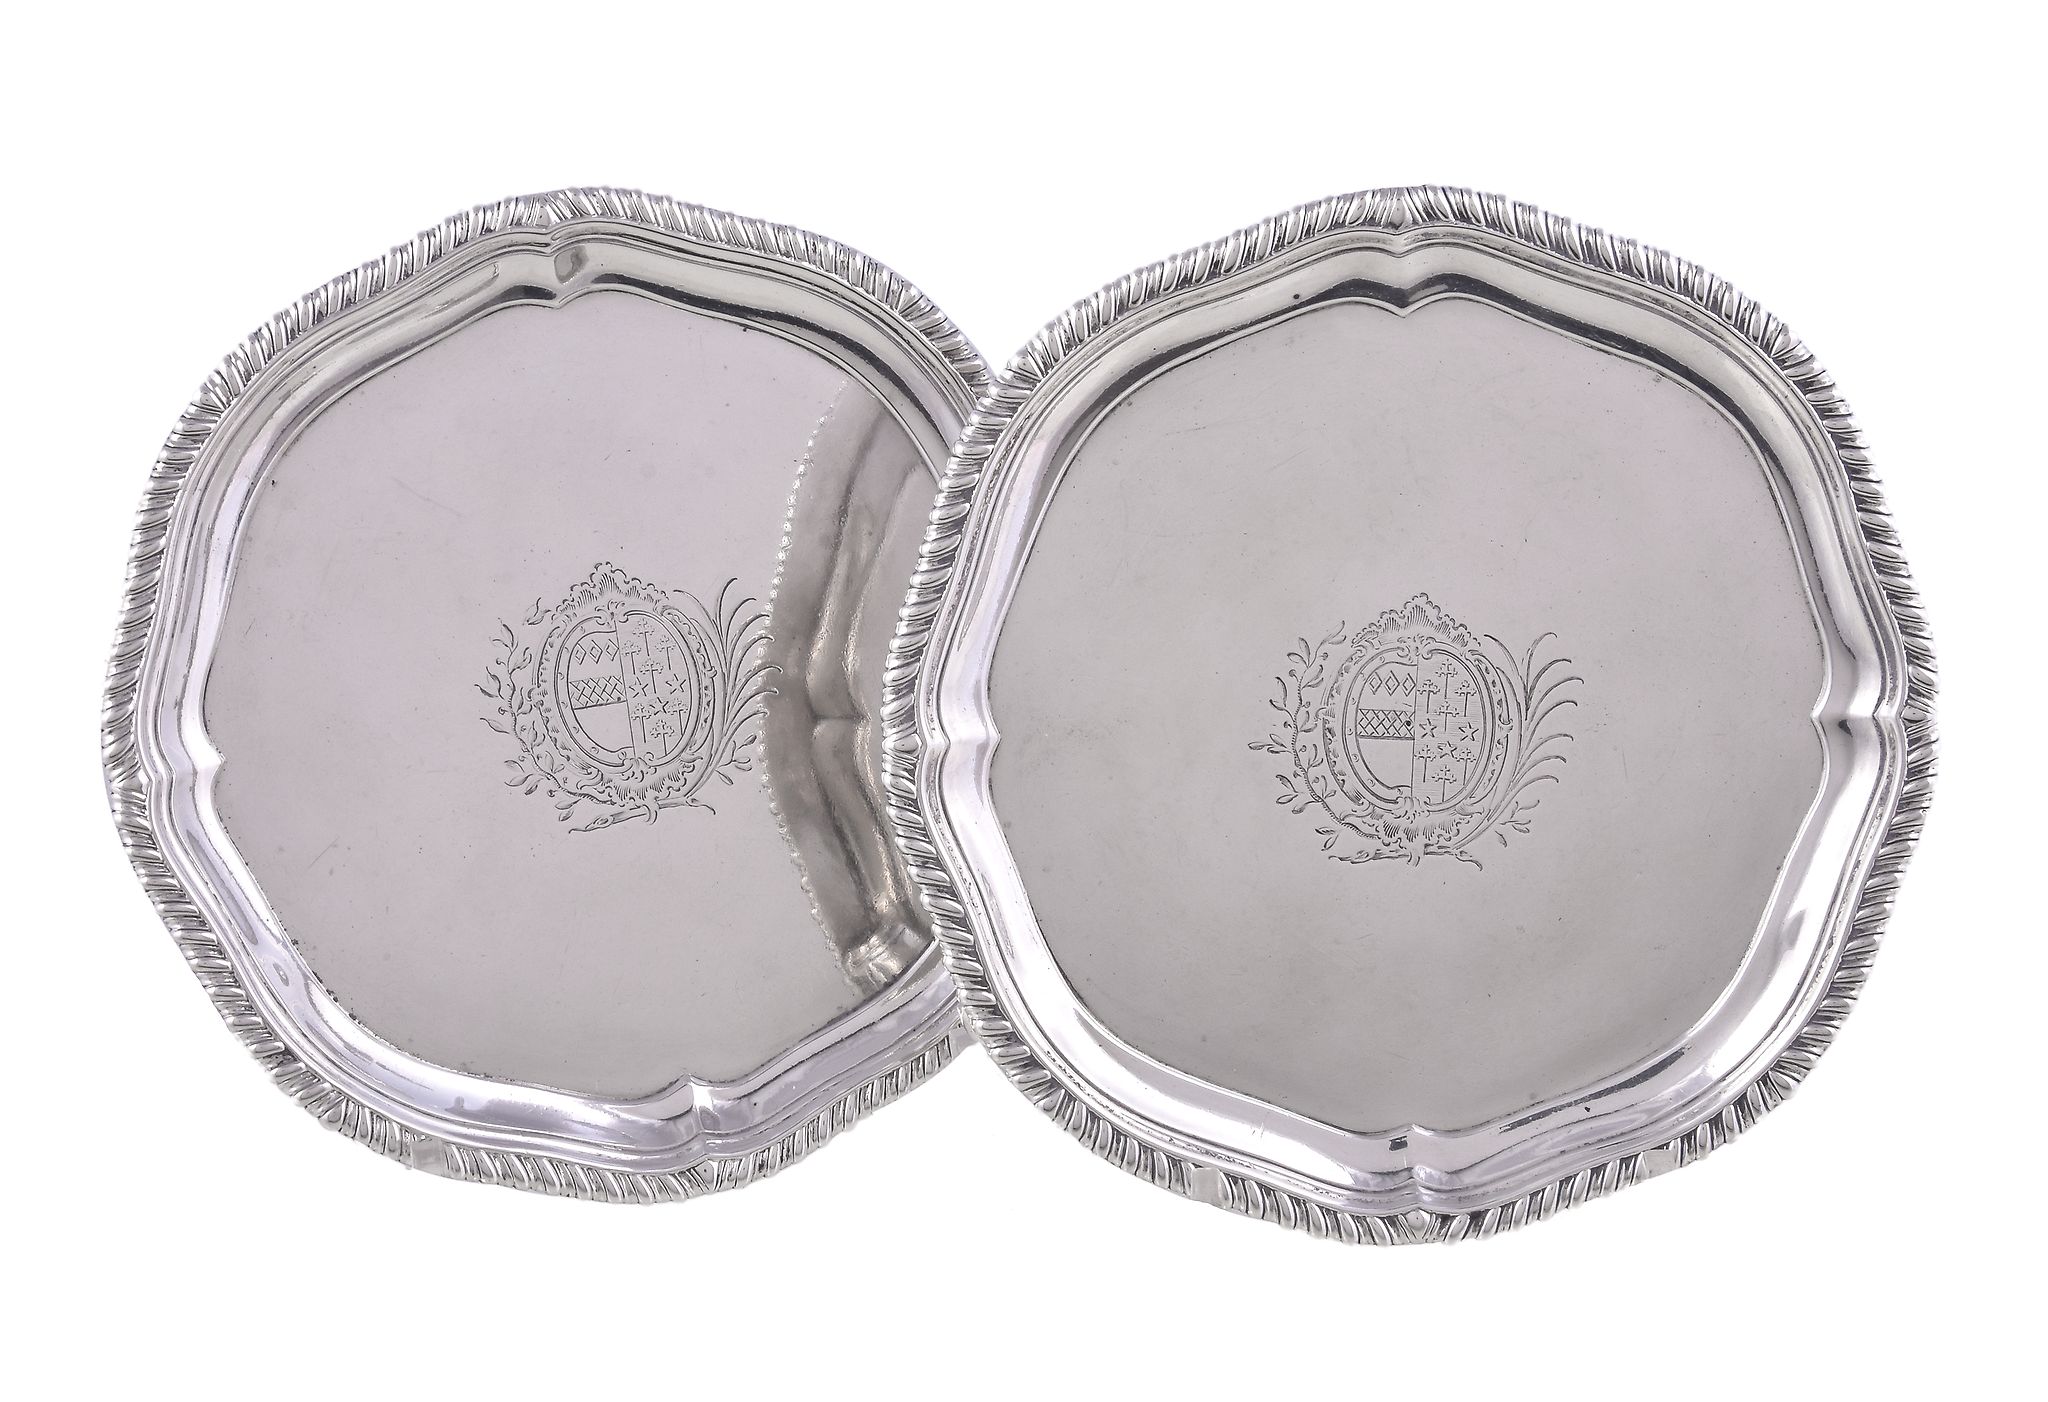 A pair of late George II silver quatrefoil waiters by Edward Wakelin, London 1757, with raised